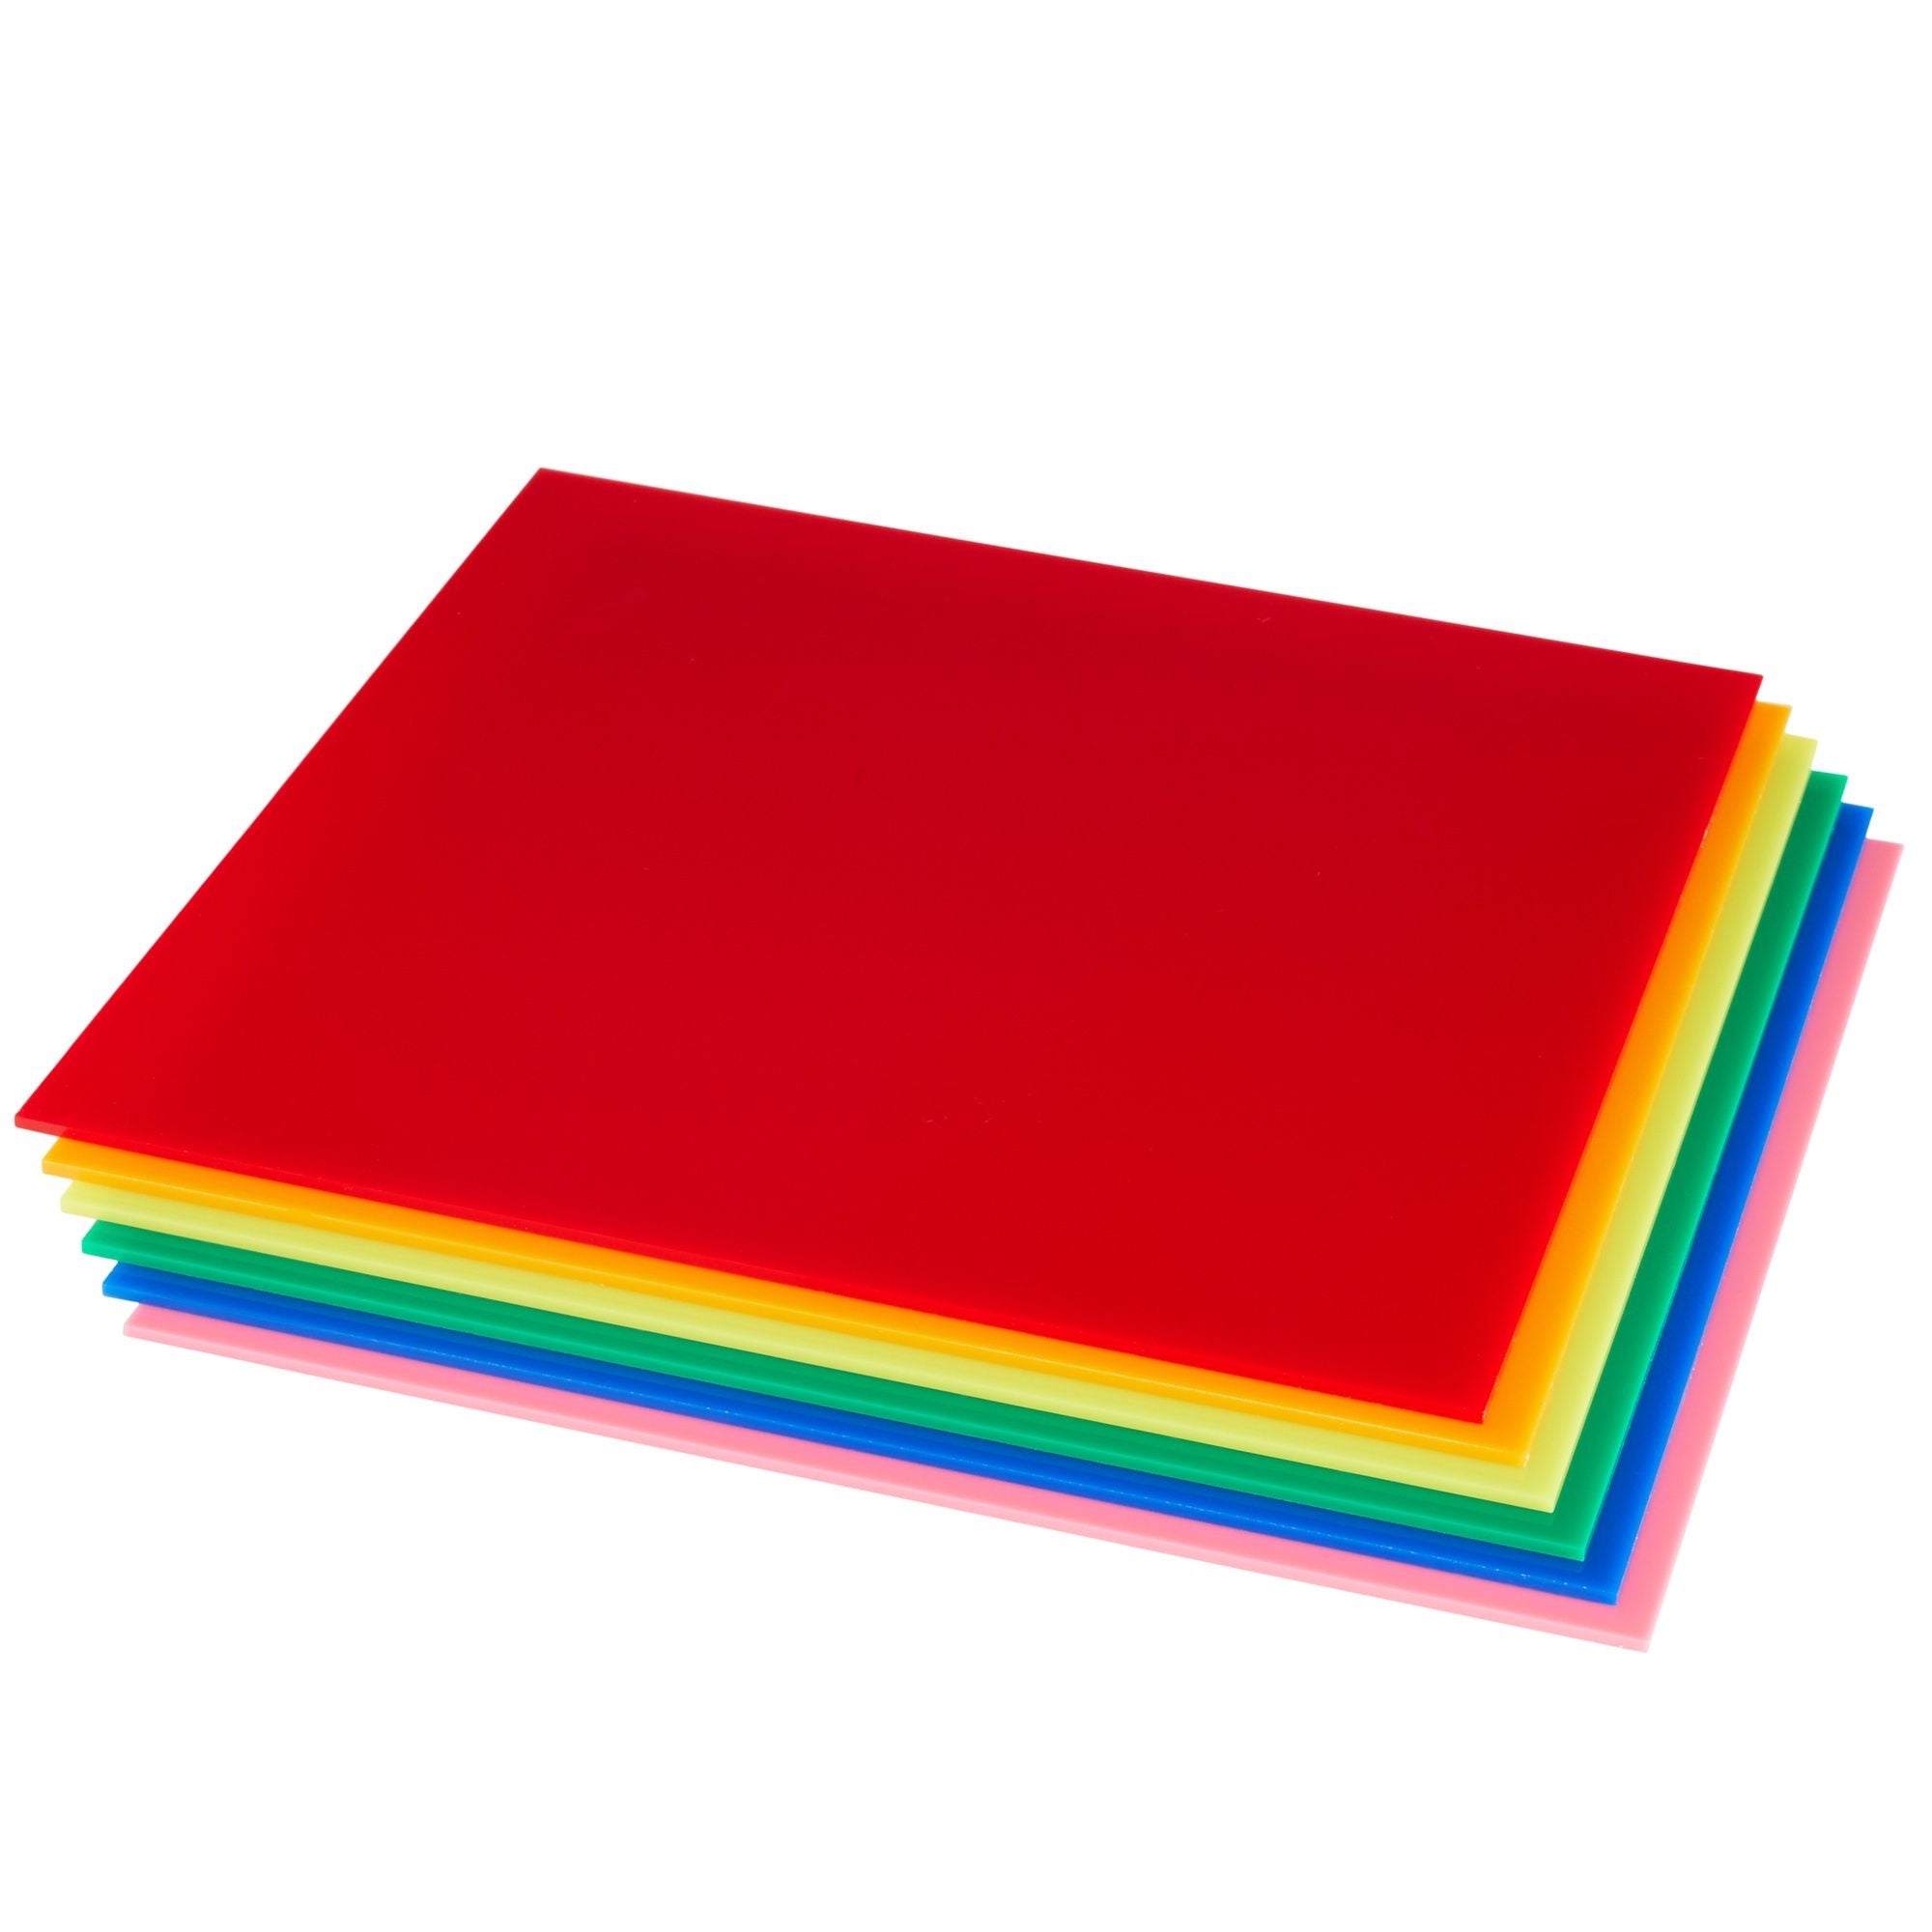  6 Pack Colored Acrylic Square Sheets for Crafts, 11.75 x 11.75  Plexiglass in 6 Colors for Laser Cutting (3mm Thick, 1/8 Inch) : Arts,  Crafts & Sewing